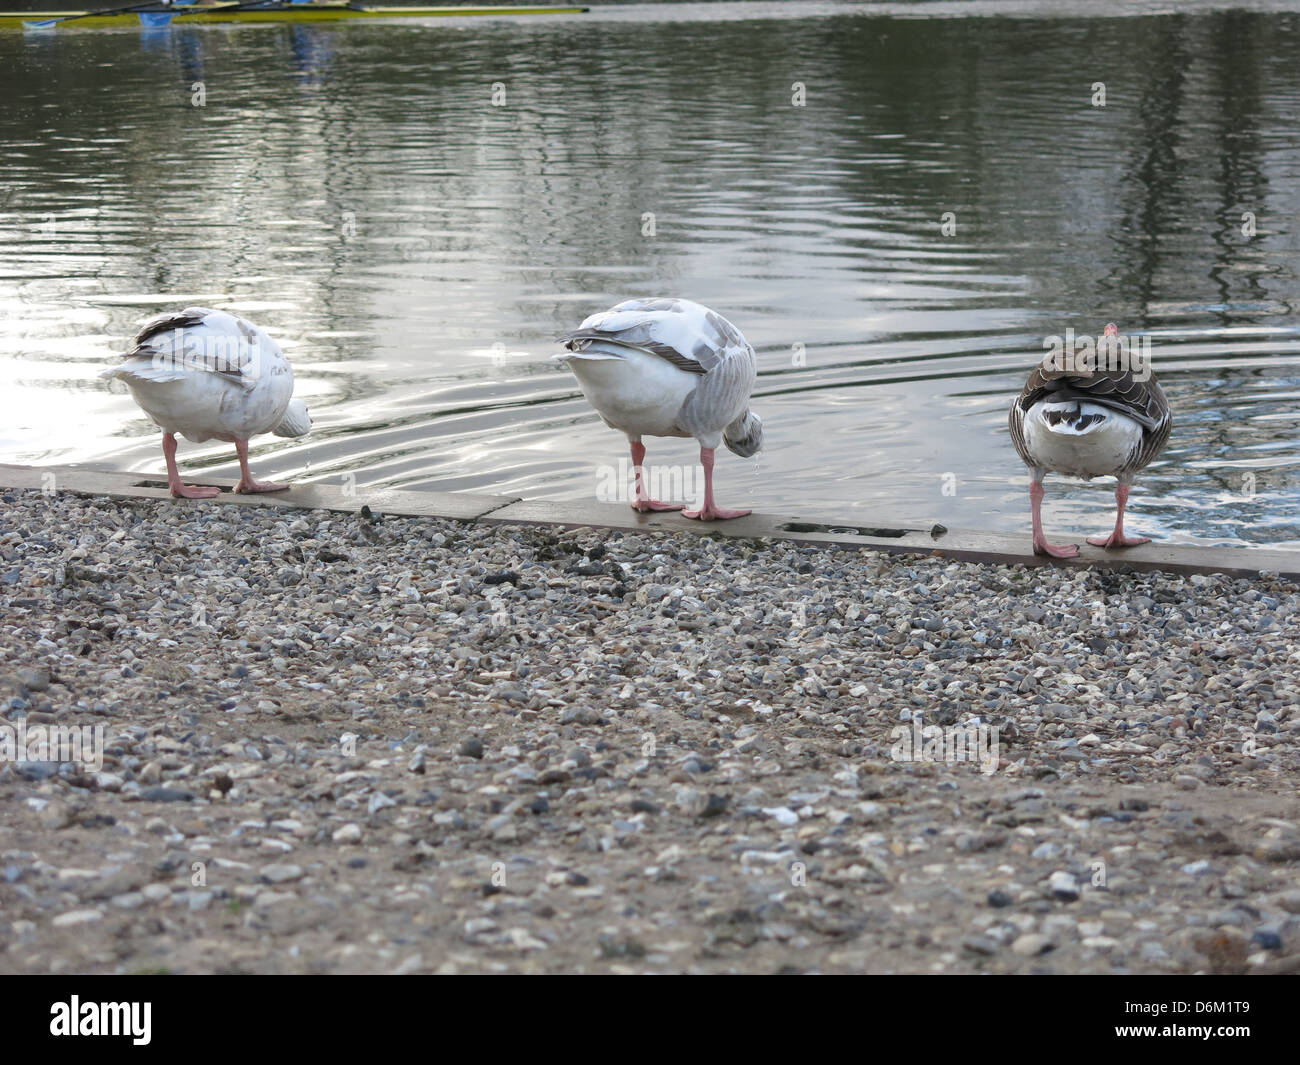 Synchronised Drinking -  Geese by The River Thames April 2013 Stock Photo